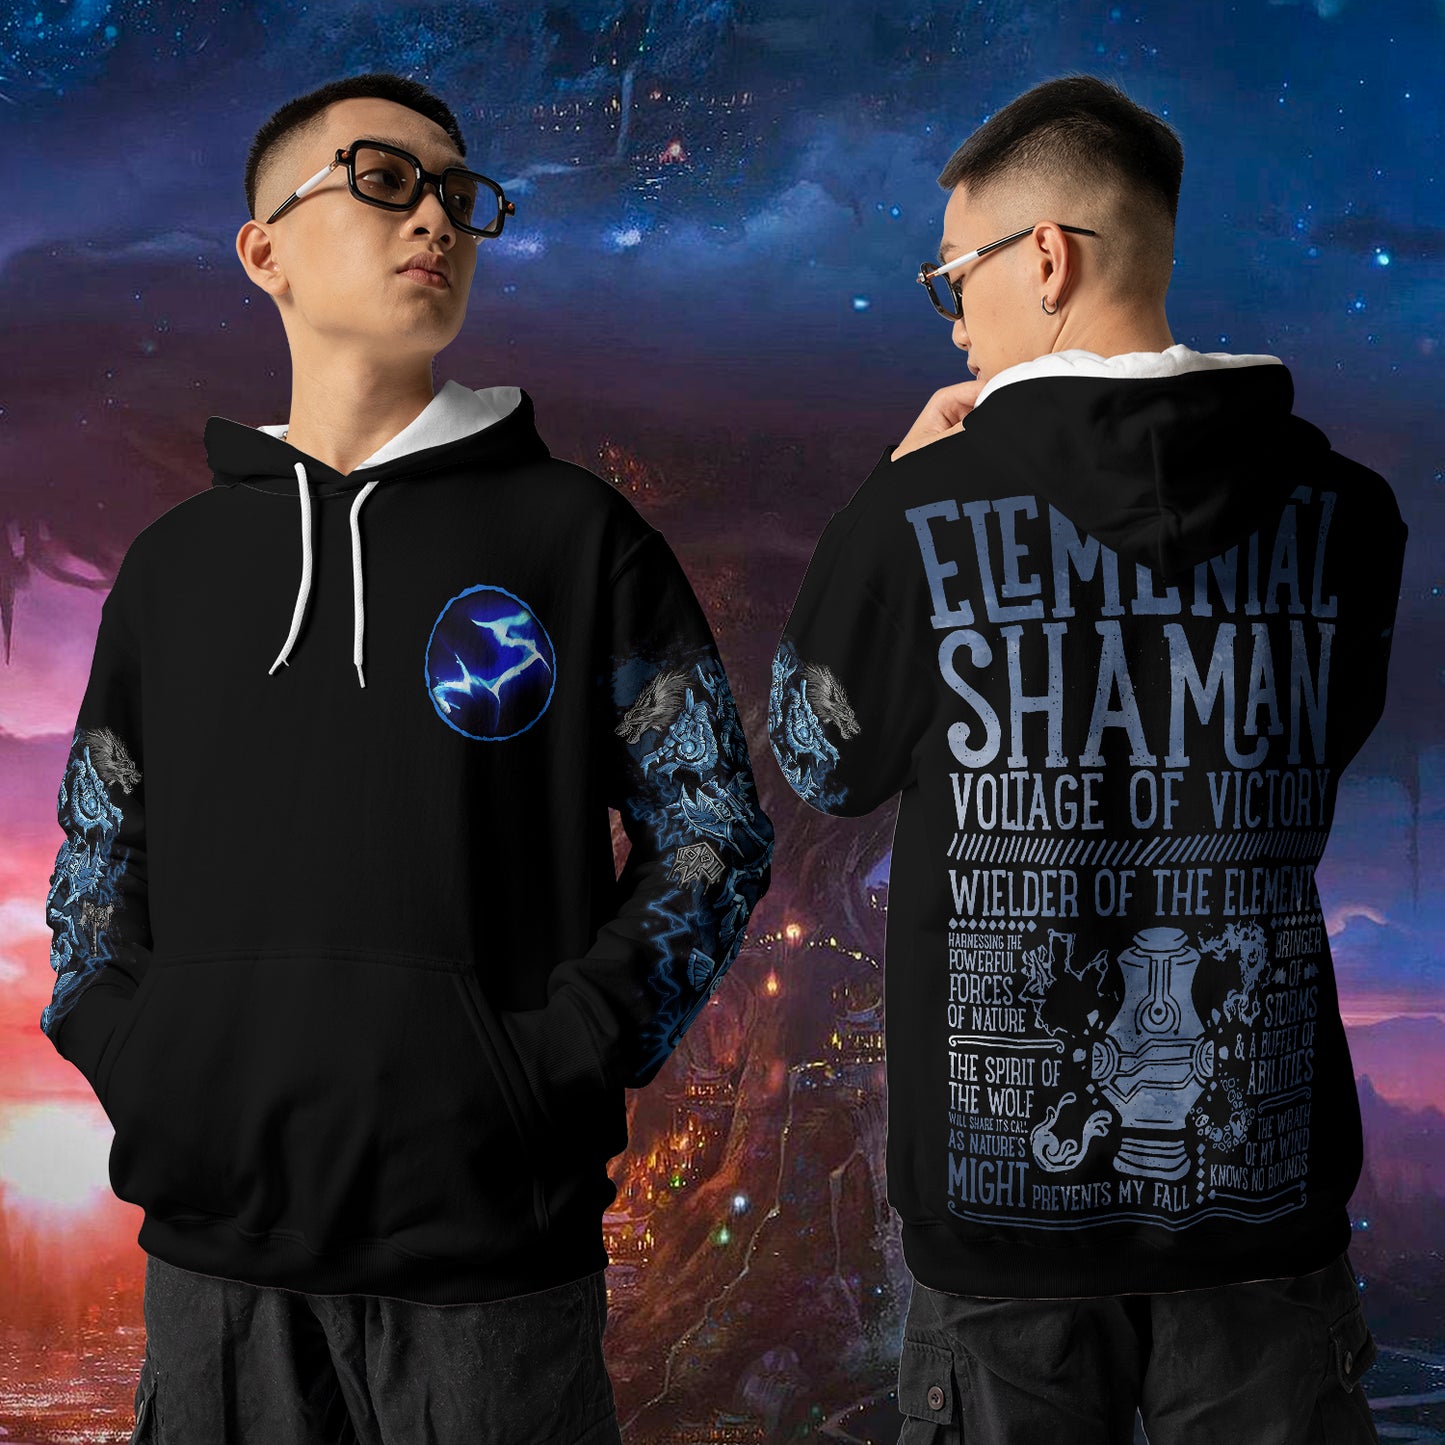 Elemental Shaman - WoW Class Guide V3 - All-over Print Hoodie